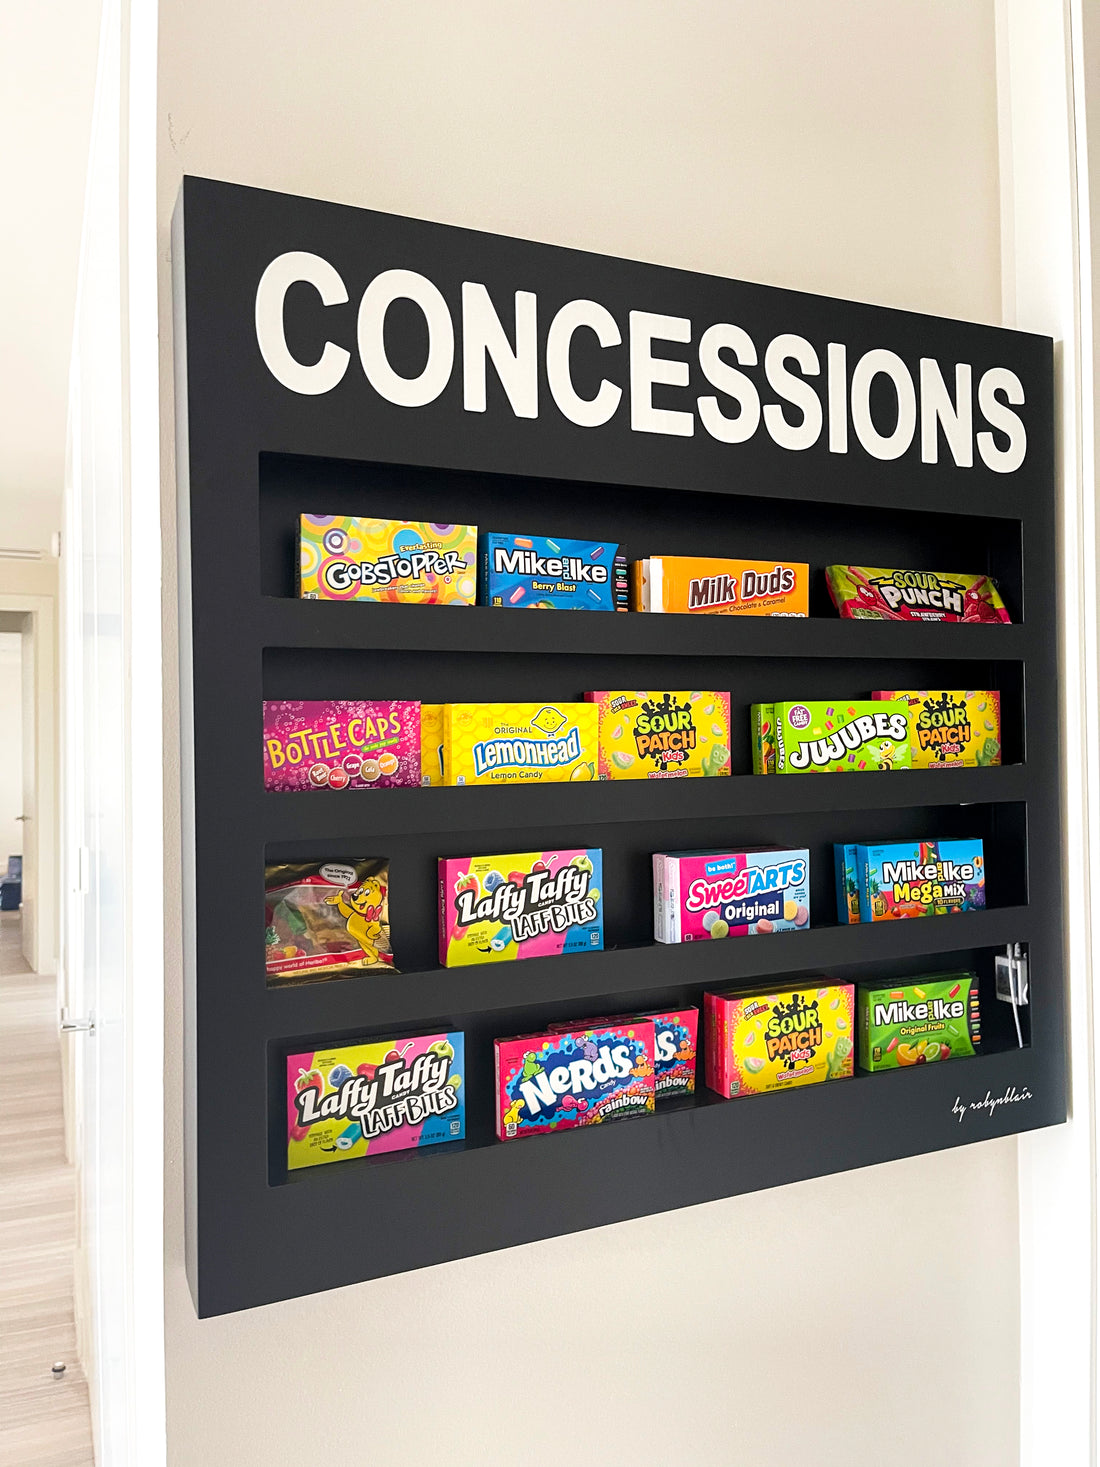 Concession collection